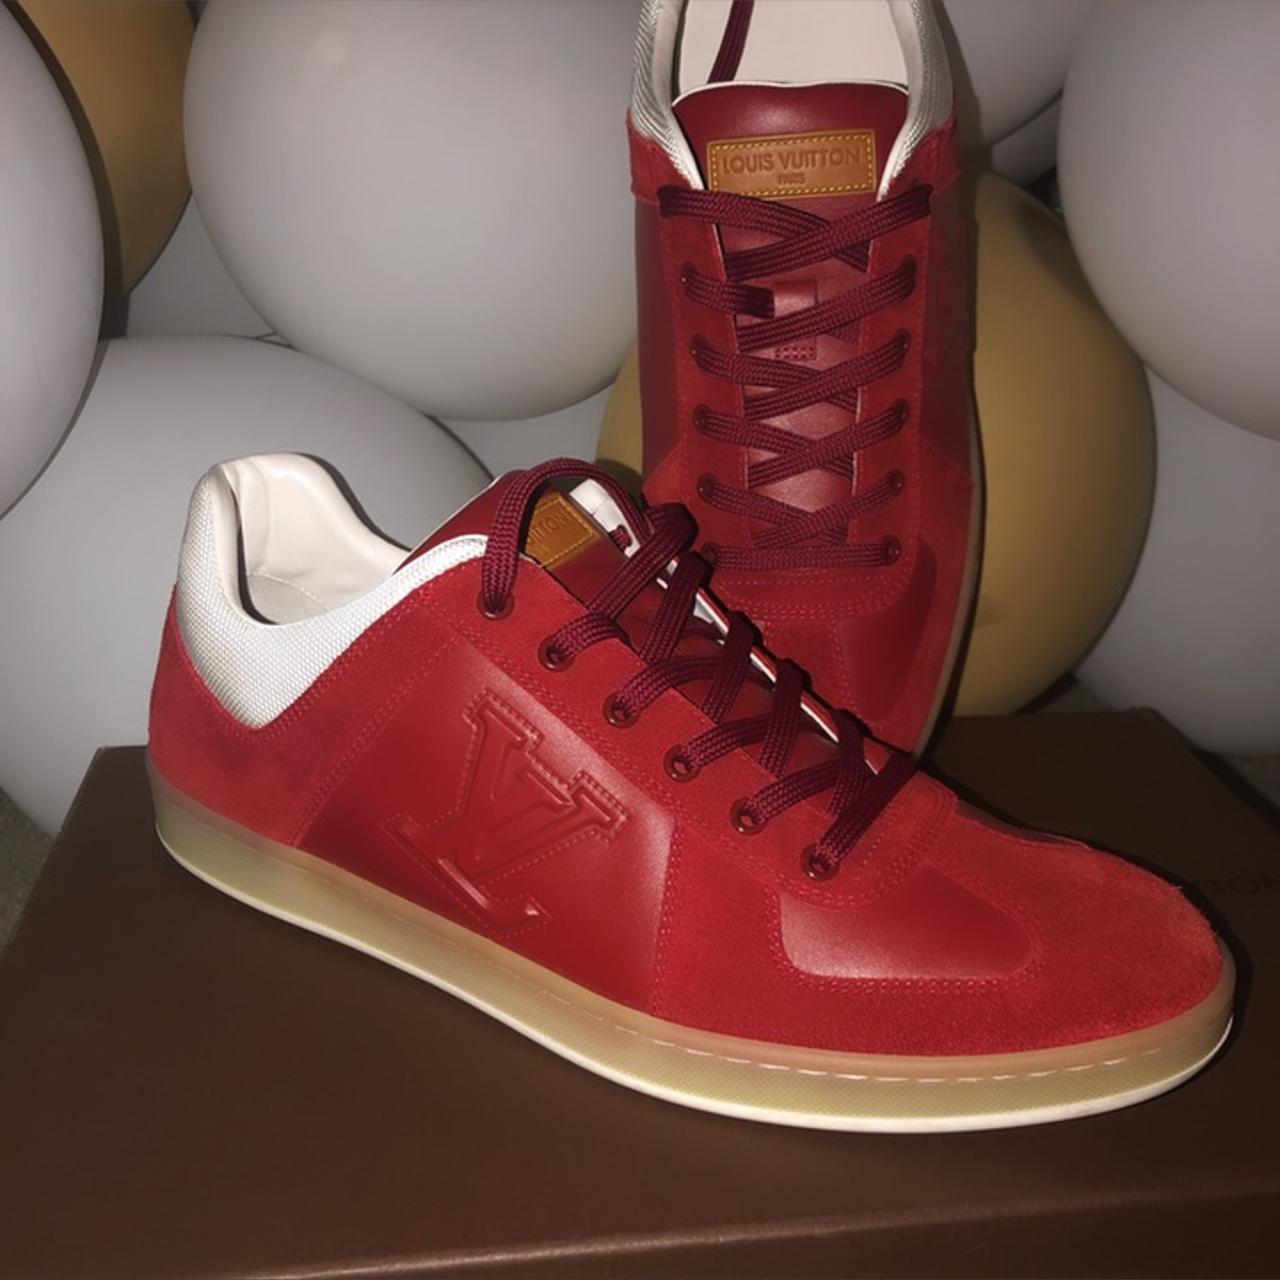 Men's Louis Vuitton red suede and leather sneaker - Depop